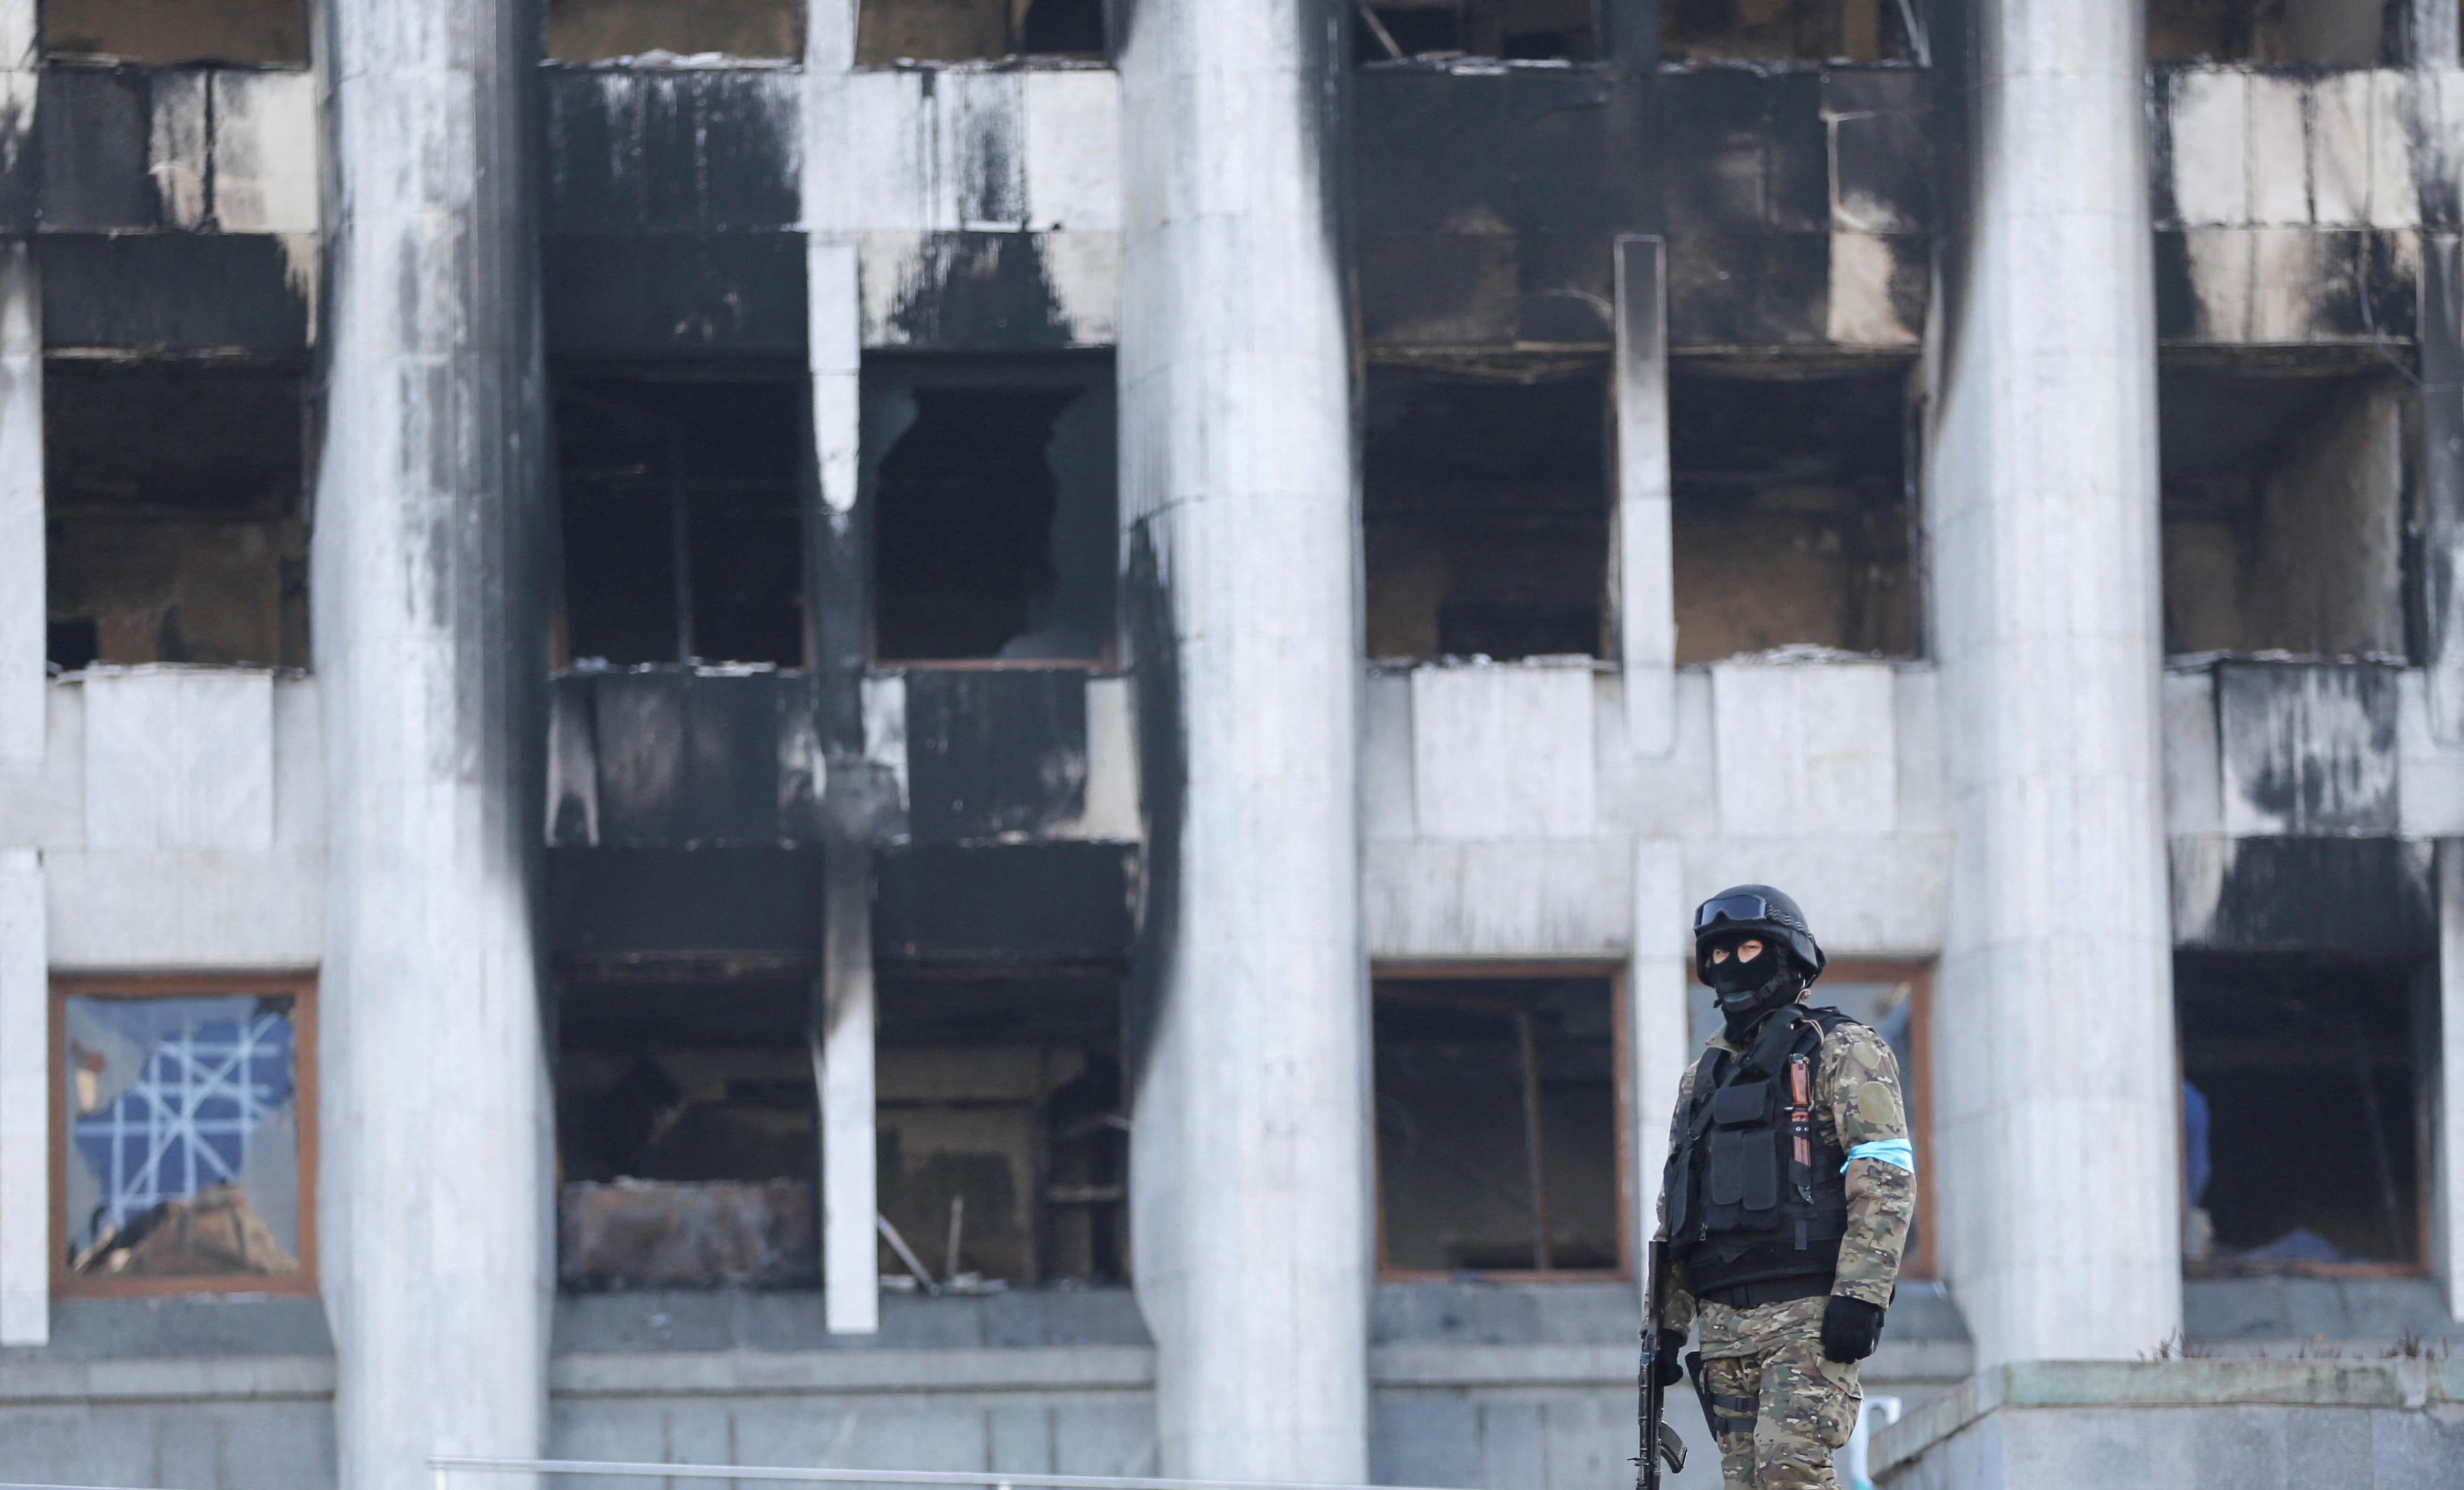 A Kazakh service member stands guard outside the city administration headquarters, which was set on fire during recent protests triggered by fuel price increase, in Almaty, Kazakhstan January 12, 2022. REUTERS/Pavel Mikheyev